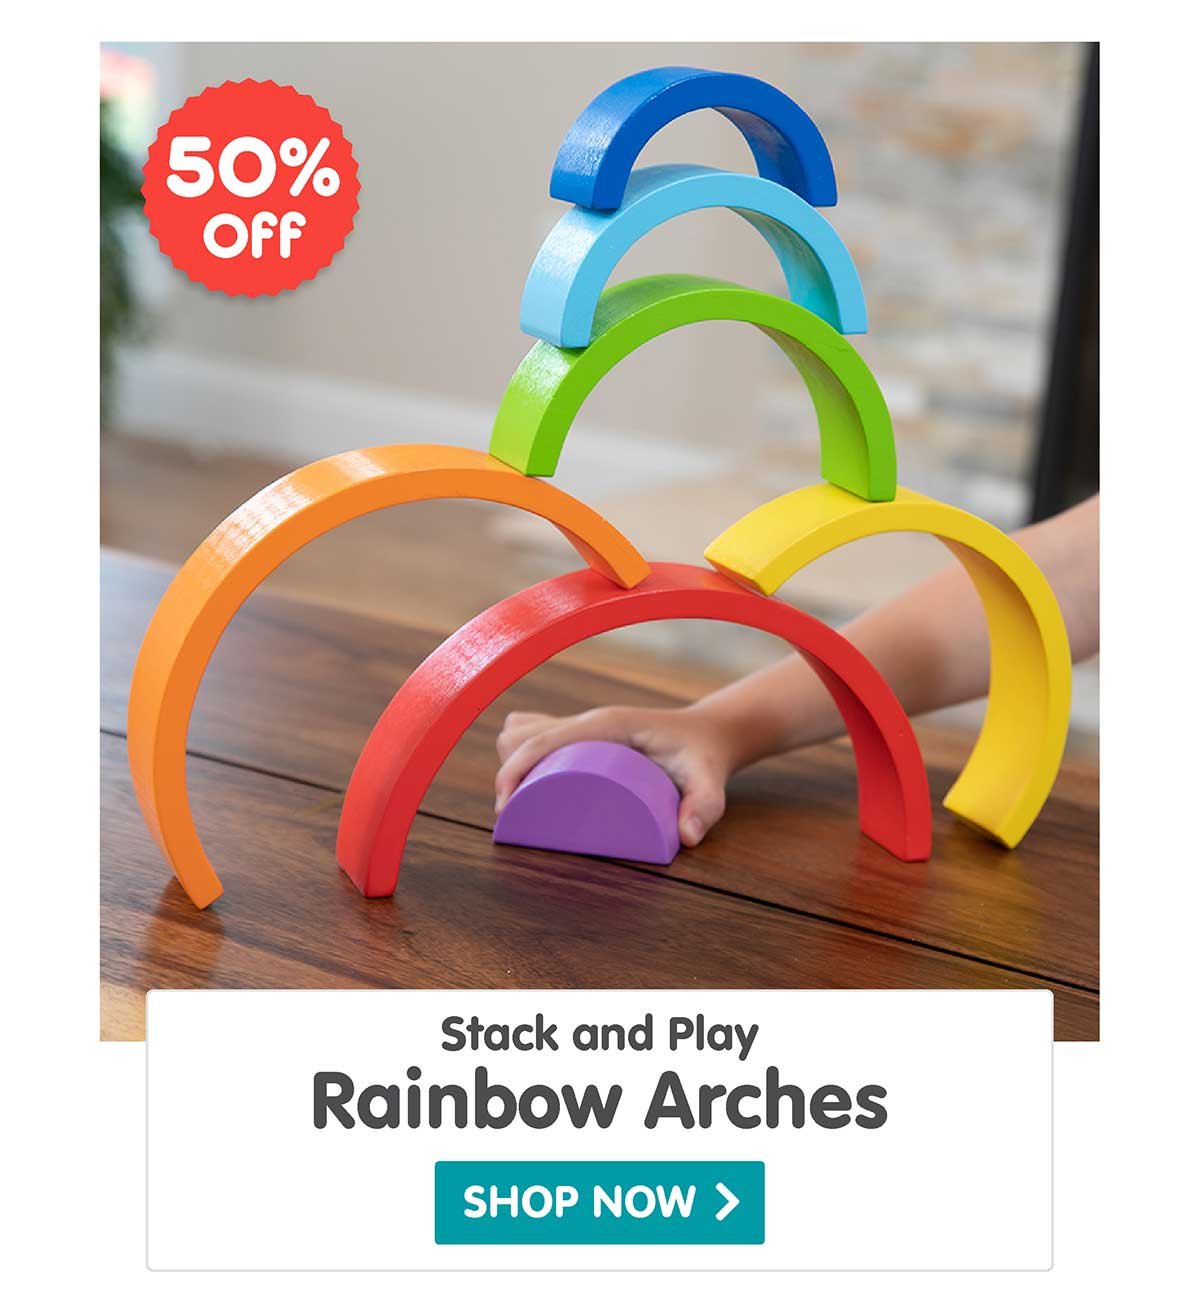 Rainbow Arches Stack and Play